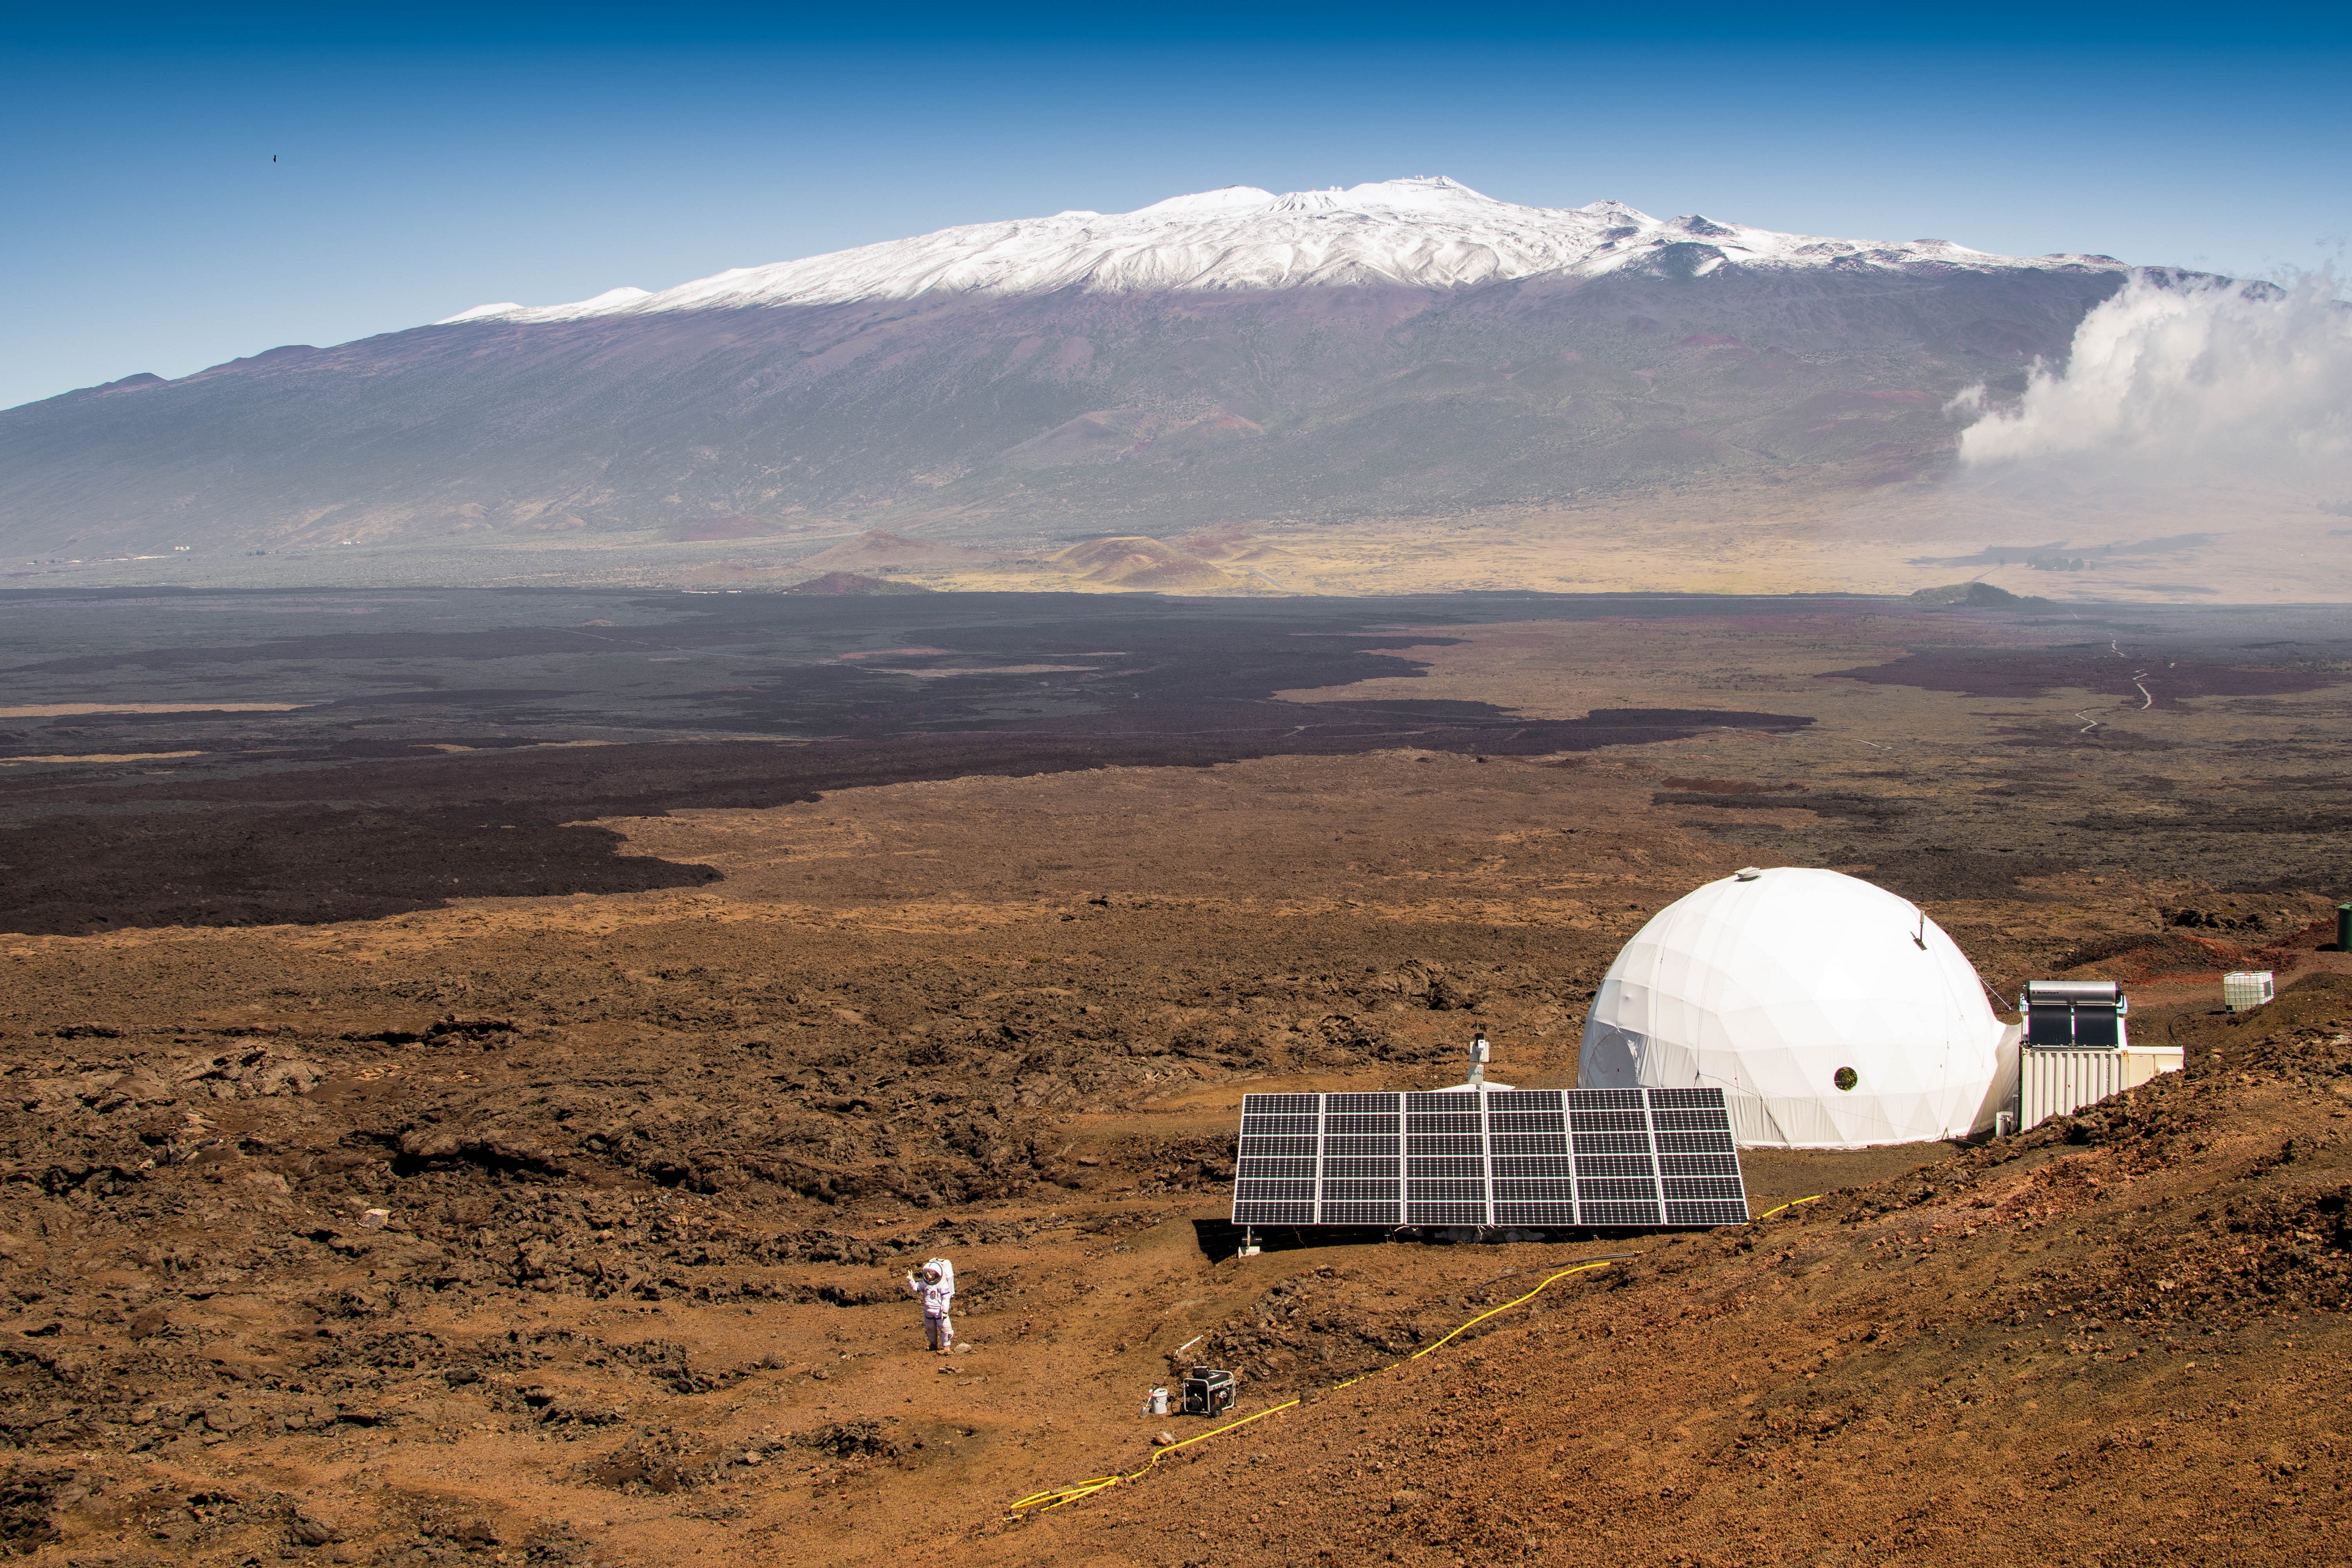 (FILES): This file photo taken on March 10, 2015, courtesy of the University of Hawaii at Manoa, shows the exterior of the HI-SEAS habitat on the northern slope of Mauna Loa in Hawaii.     NASA's Hawaii Space Exploration Analogue and Simulation (HI-SEAS) program officially ended Sunday, August 29, 2016. Six crew members returned to civilization following one-year of isolation.  == RESTRICTED TO EDITORIAL USE / MANDATORY CREDIT: "AFP PHOTO /  HANDOUT /  University of Hawaii at Manoa / Neil Scheibelhut"/ NO MARKETING / NO ADVERTISING CAMPAIGNS /  NO A LA CARTE SALES / DISTRIBUTED AS A SERVICE TO CLIENTS == / AFP PHOTO / University of Hawaii at Manoa / Neil Scheibelhut / == RESTRICTED TO EDITORIAL USE / MANDATORY CREDIT: "AFP PHOTO /  HANDOUT /  University of Hawaii at Manoa / Neil Scheibelhut"/ NO MARKETING / NO ADVERTISING CAMPAIGNS /  NO A LA CARTE SALES / DISTRIBUTED AS A SERVICE TO CLIENTS ==